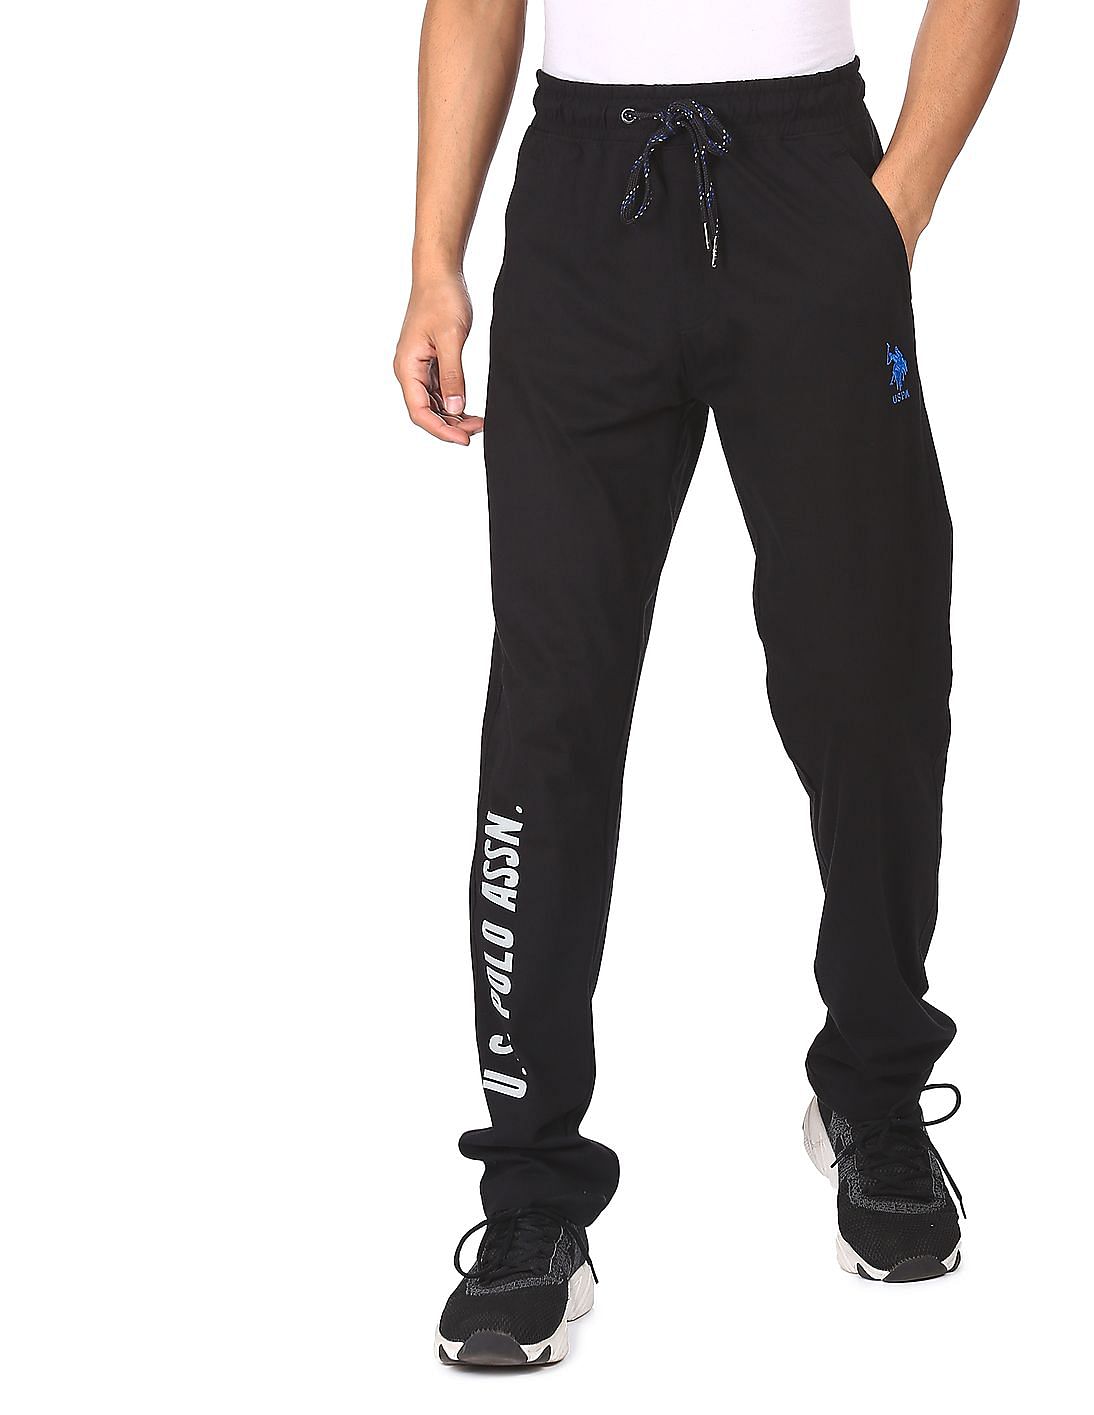 Buy Grey Track Pants for Men by ALTHEORY SPORT Online  Ajiocom